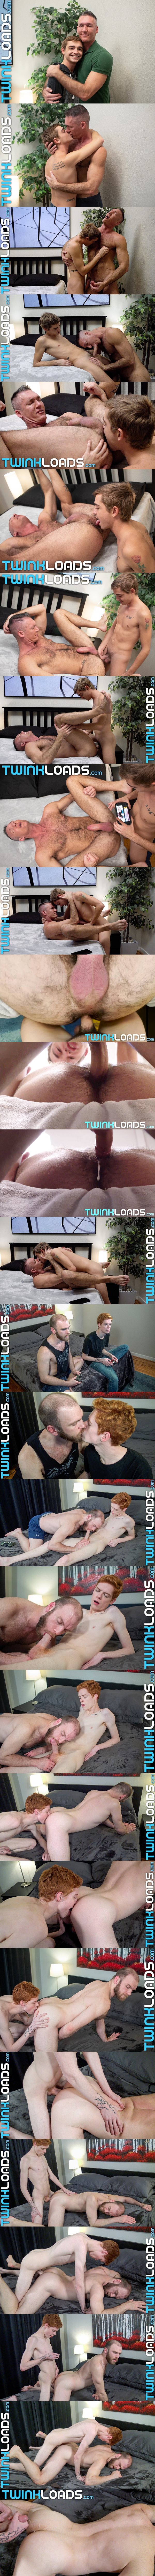 Twink Loads - Grayson Lange and Connor Taylor bareback and creampie daddy Silver Steele and Peter Marcus (aka Bishop Gibson) 02